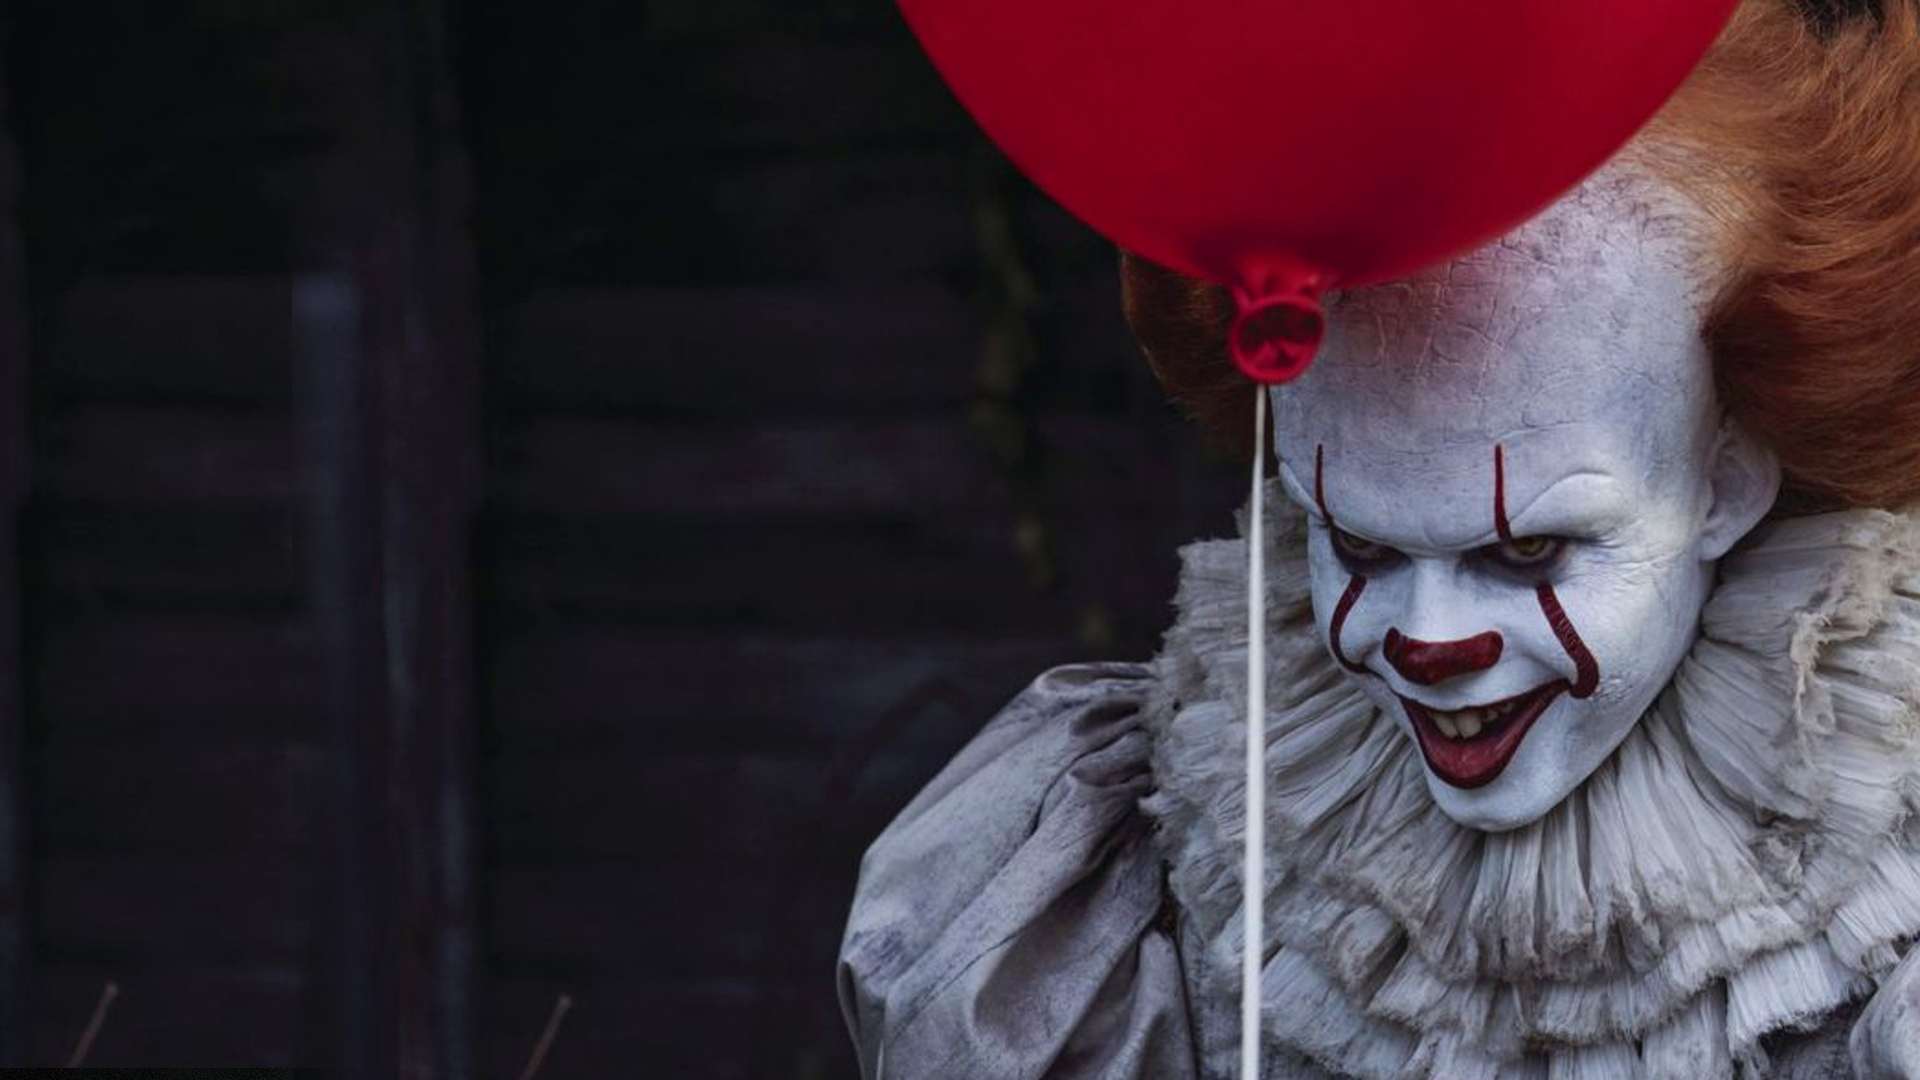 it chapter two 2 everything we know so far about the stephen king horror movie based on its teaser trailer first look and plot summary image